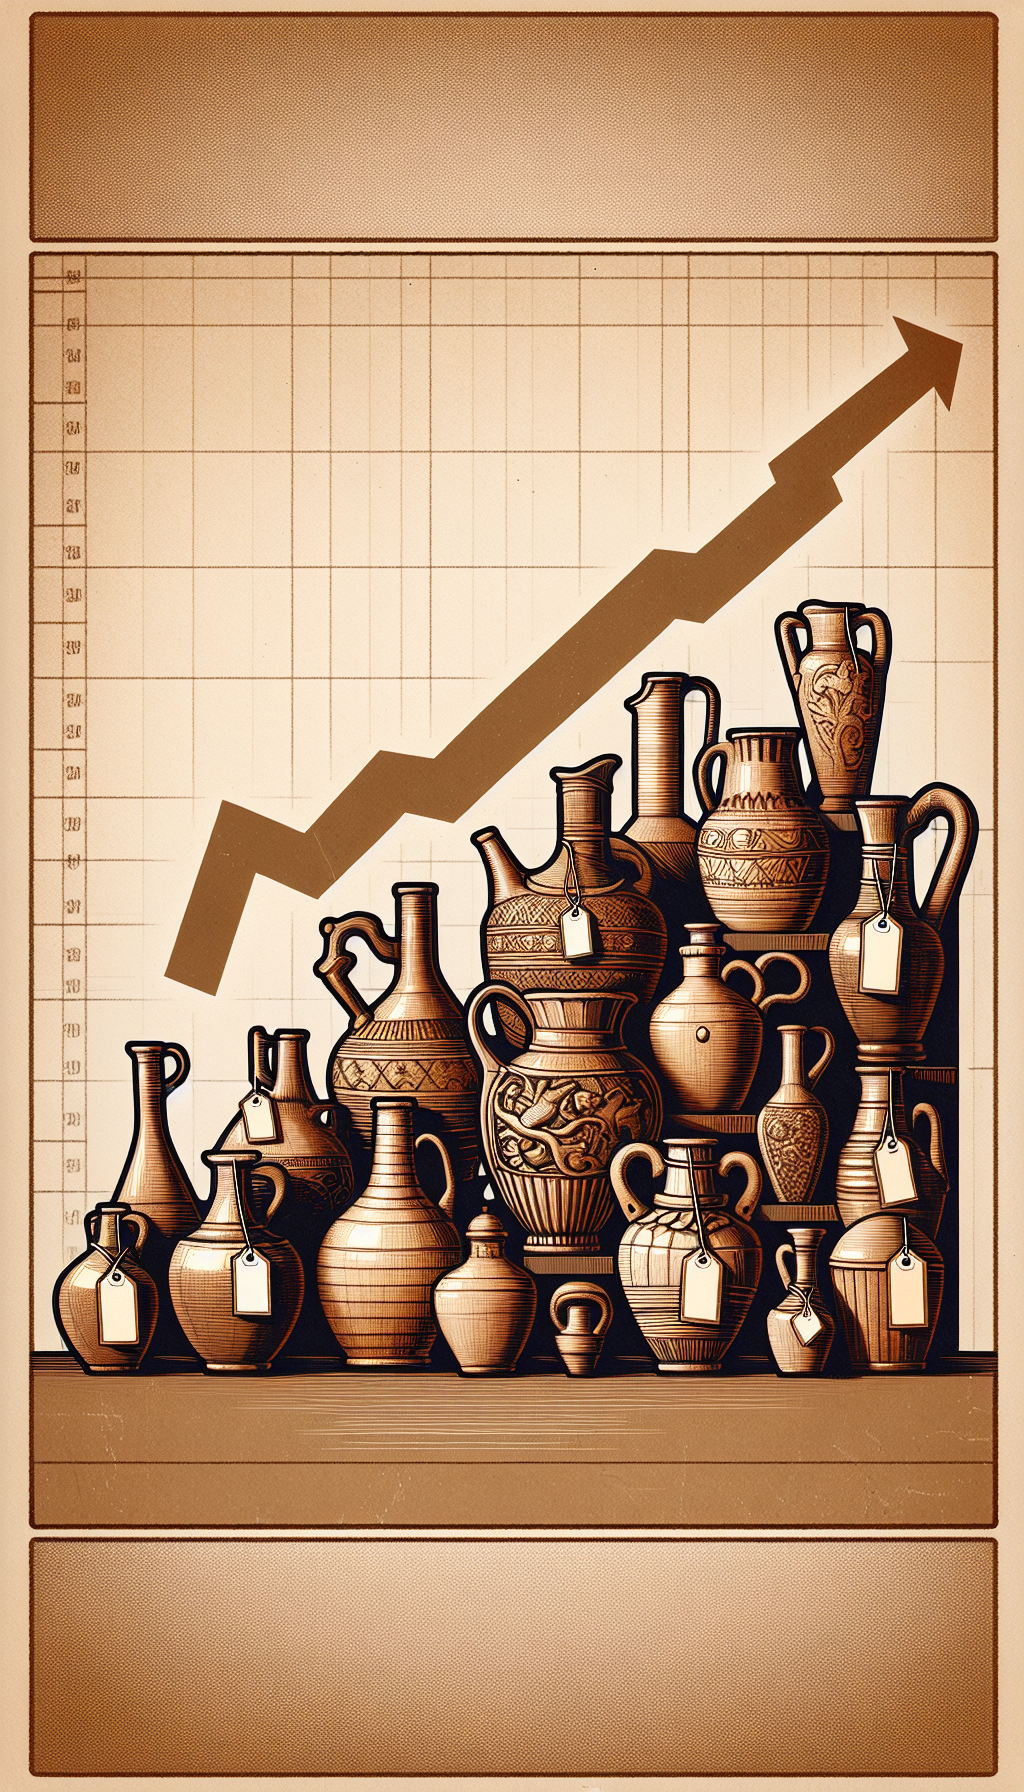 An illustration shows a collection of antique stoneware jugs of varying heights and designs on a whimsical stock market graph. The jugs replace traditional market bars, increasing and decreasing in height to represent their fluctuating values, with price tags hanging off their handles to symbolize their worth. The background subtly transitions from sepia to vibrant colors, illustrating time's effect on value.